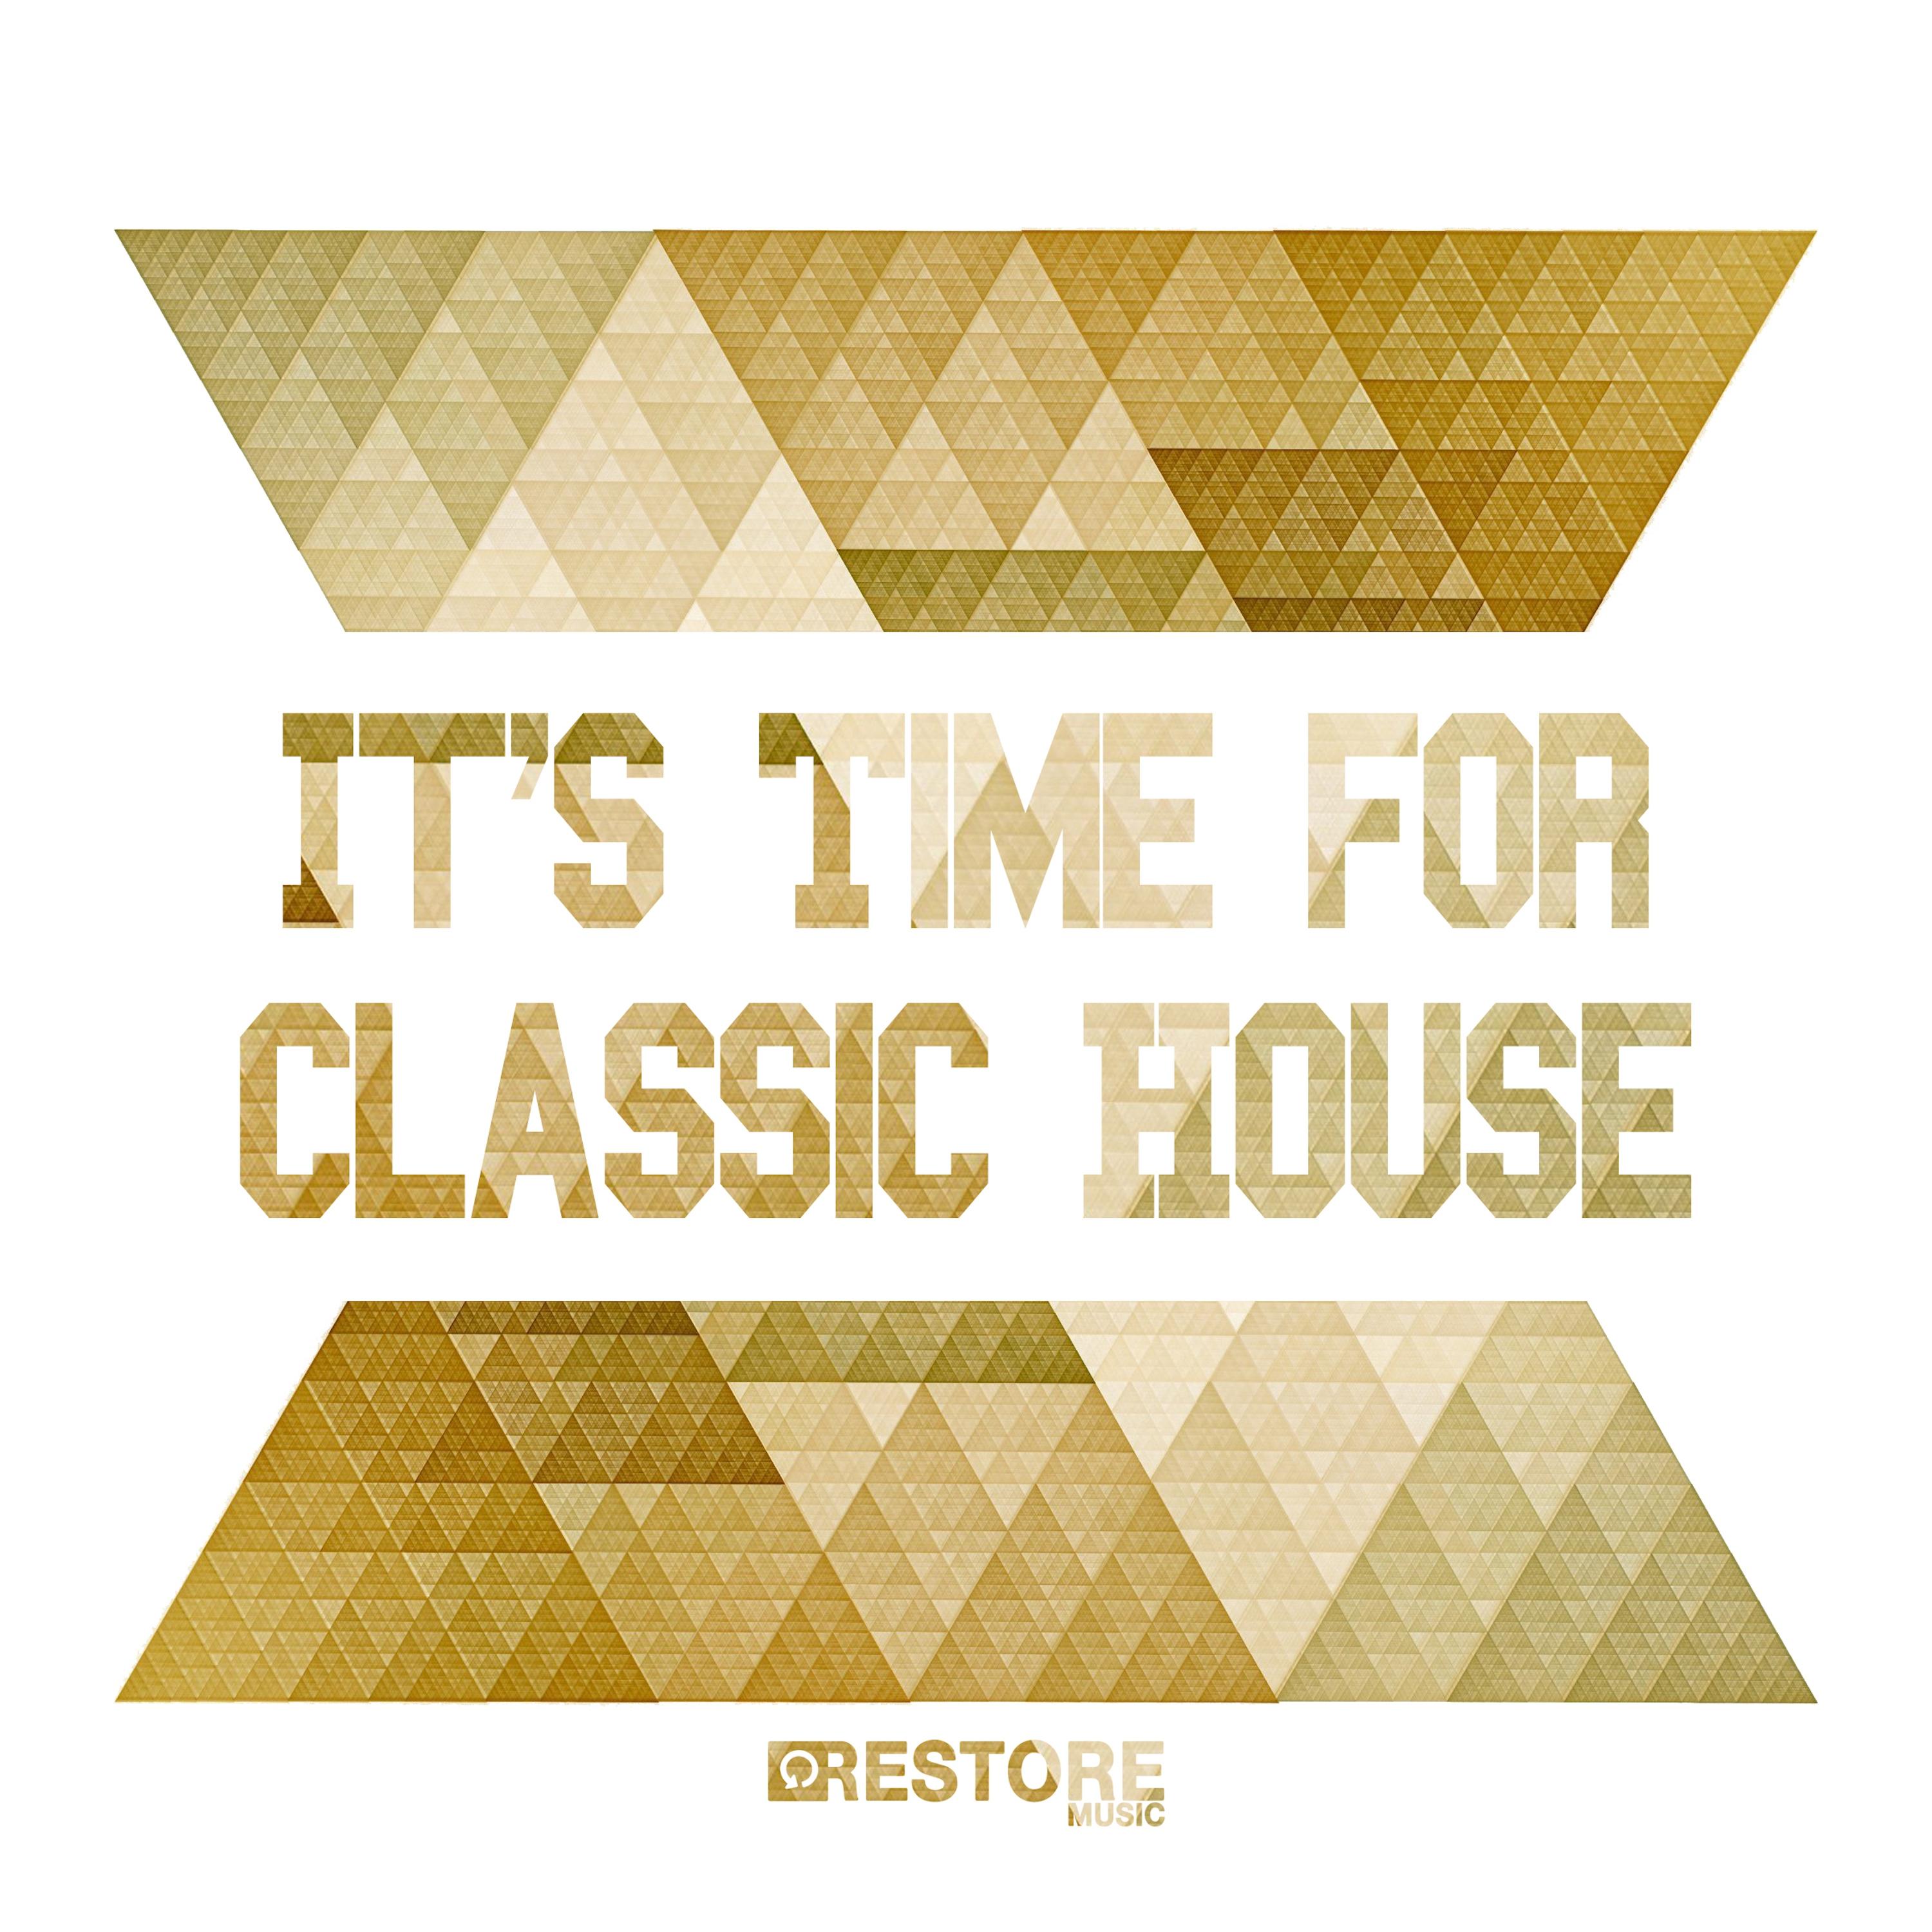 It's Time for Classic House